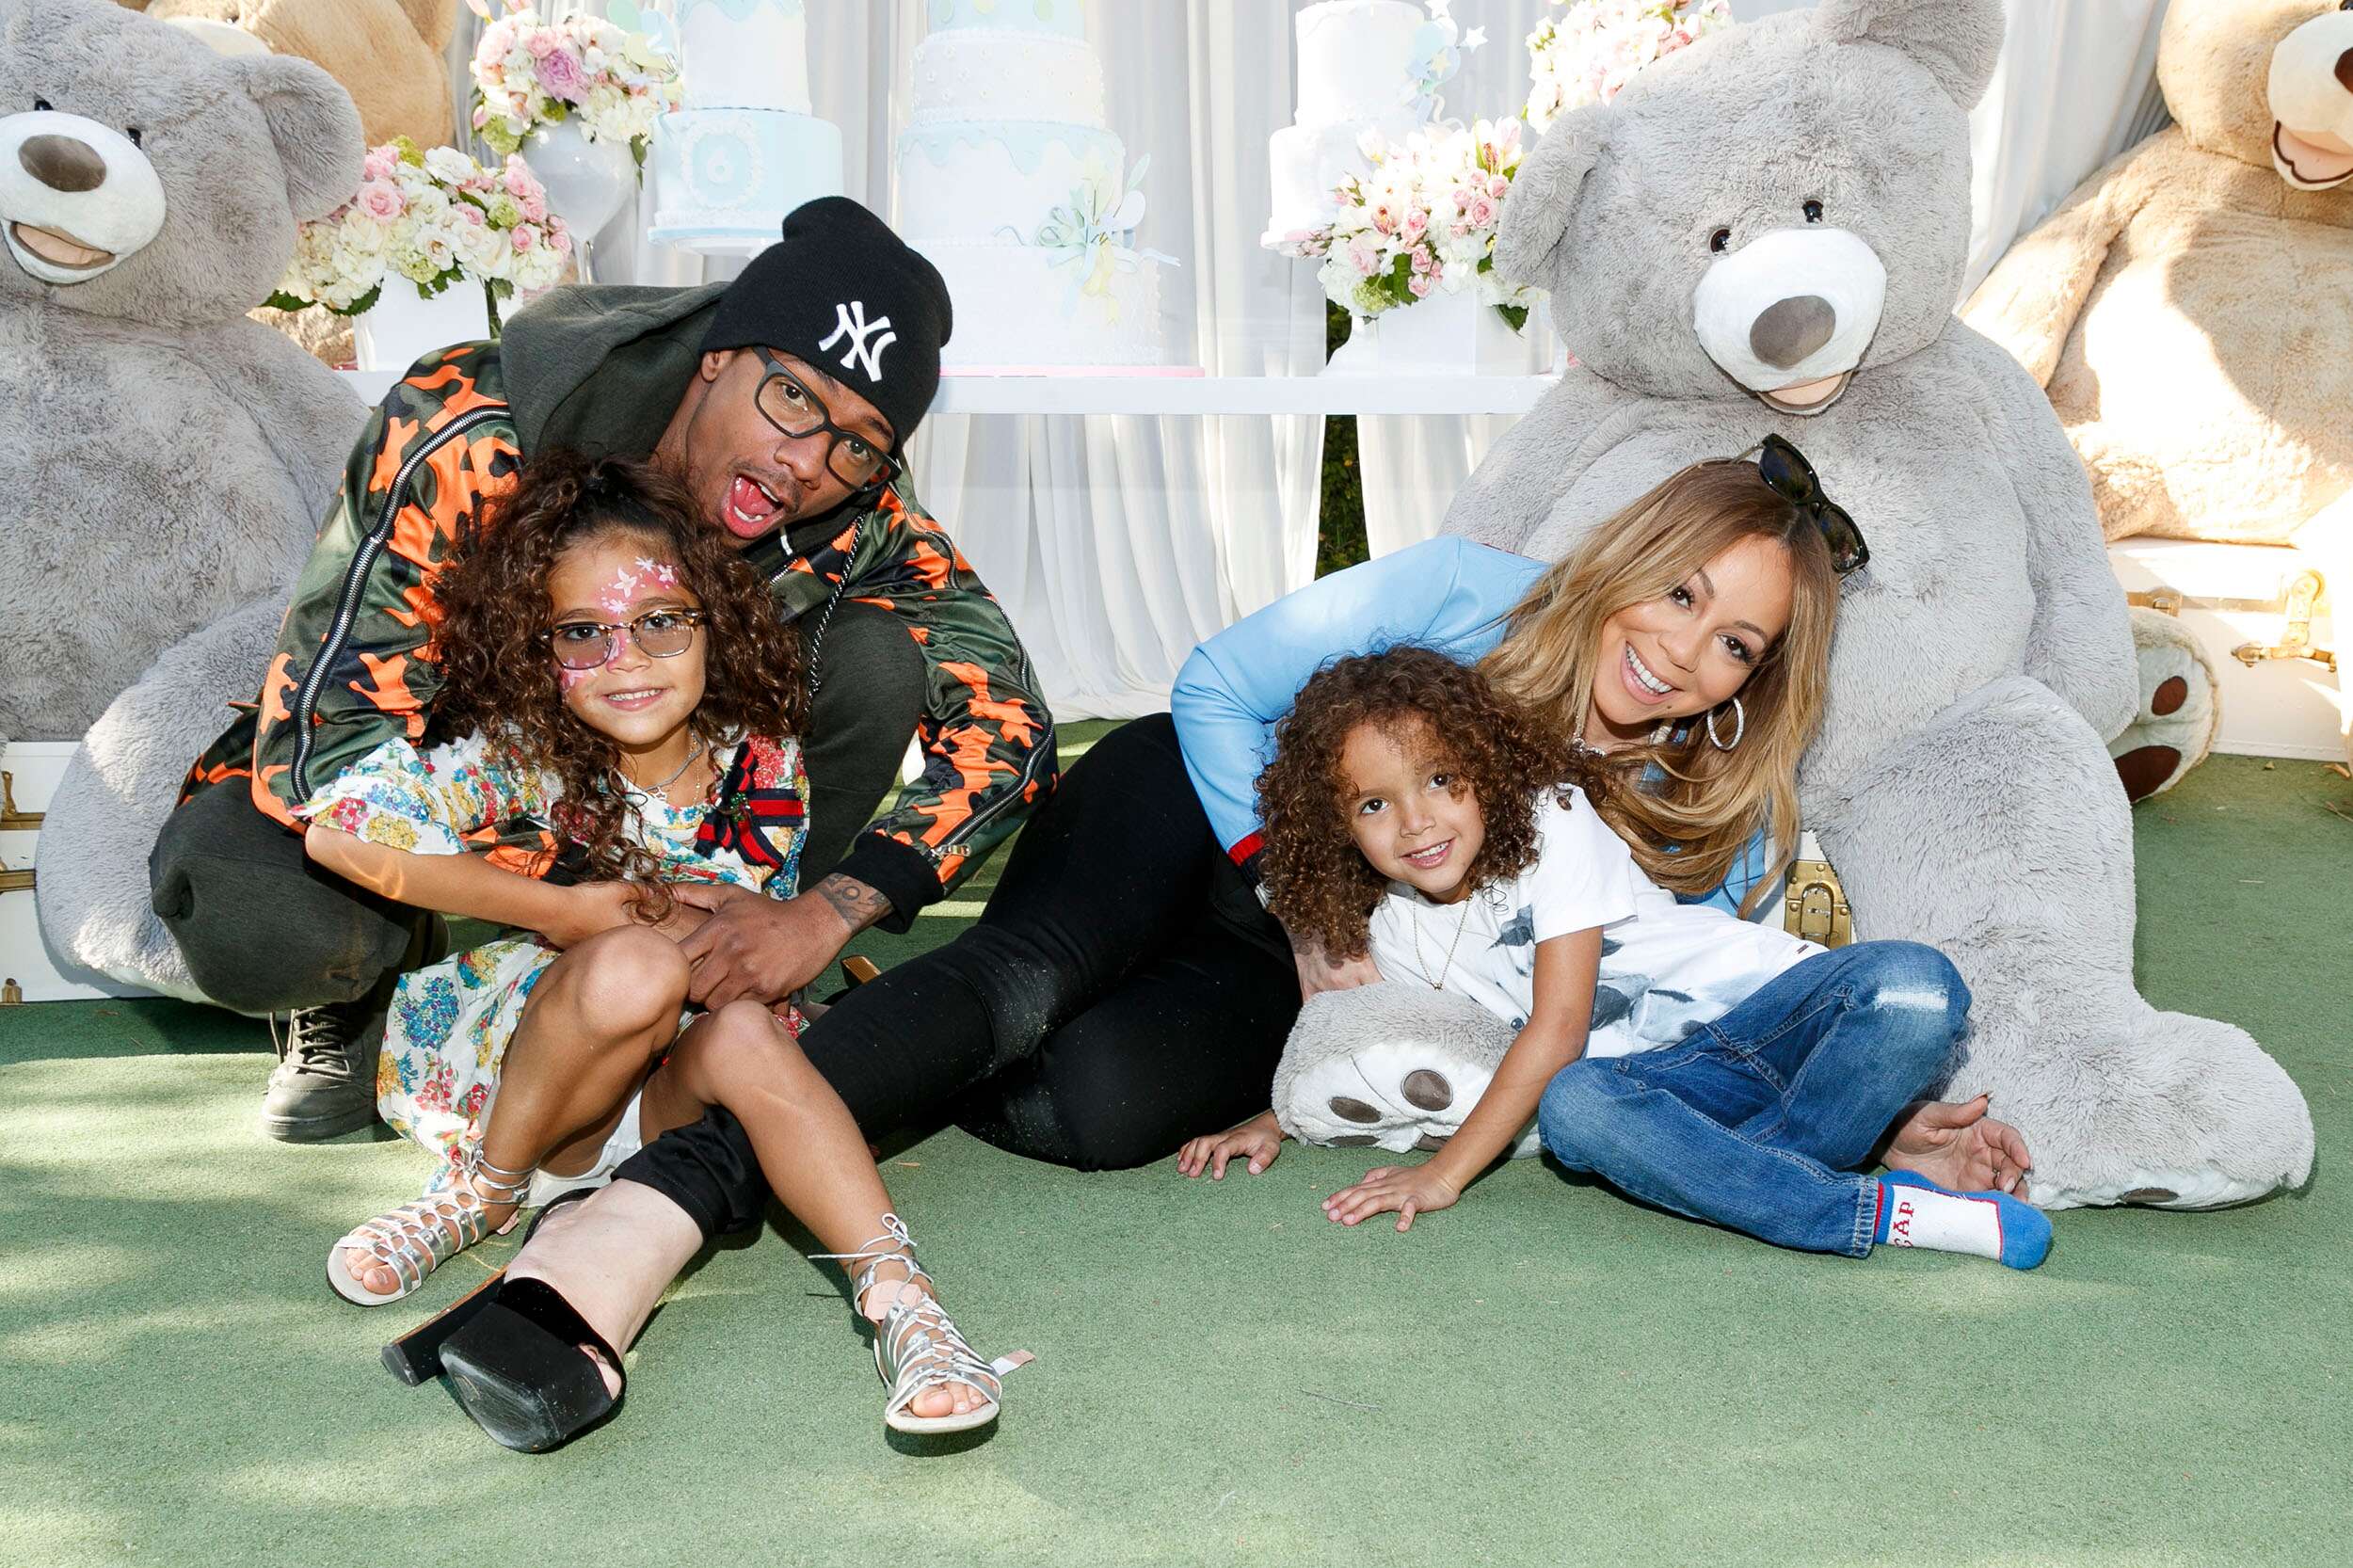 Singer Mariah Carey Reportedly Drops Legal Petition Against Nick Cannon Over Custody Of Their Twins